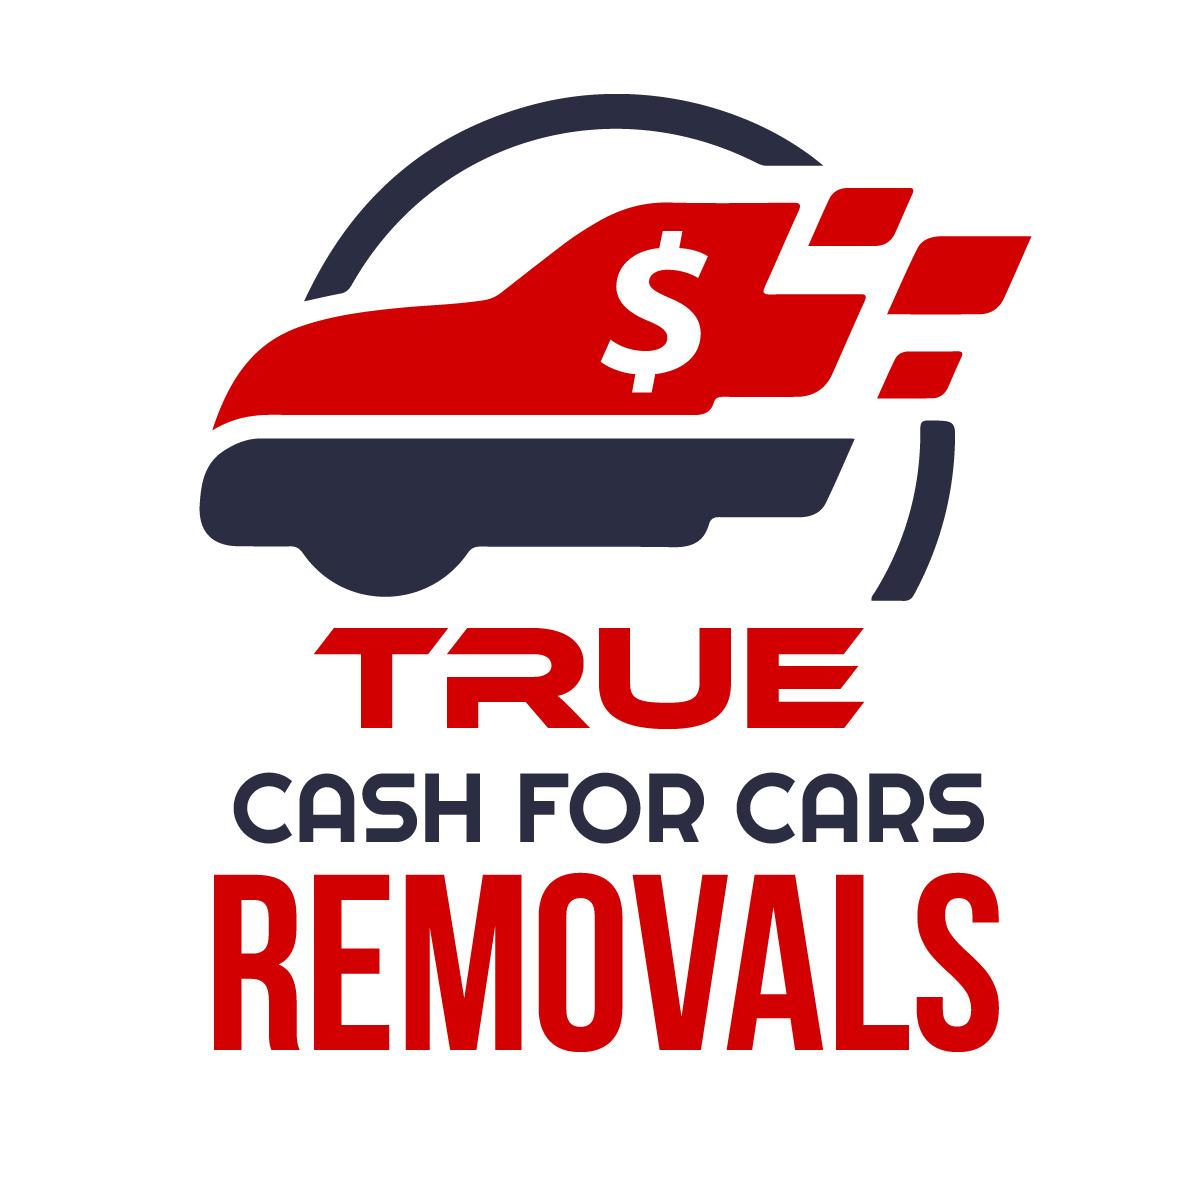 True Cash for Cars Removals True Cash for Cars Removals St Albans (03) 9000 8362